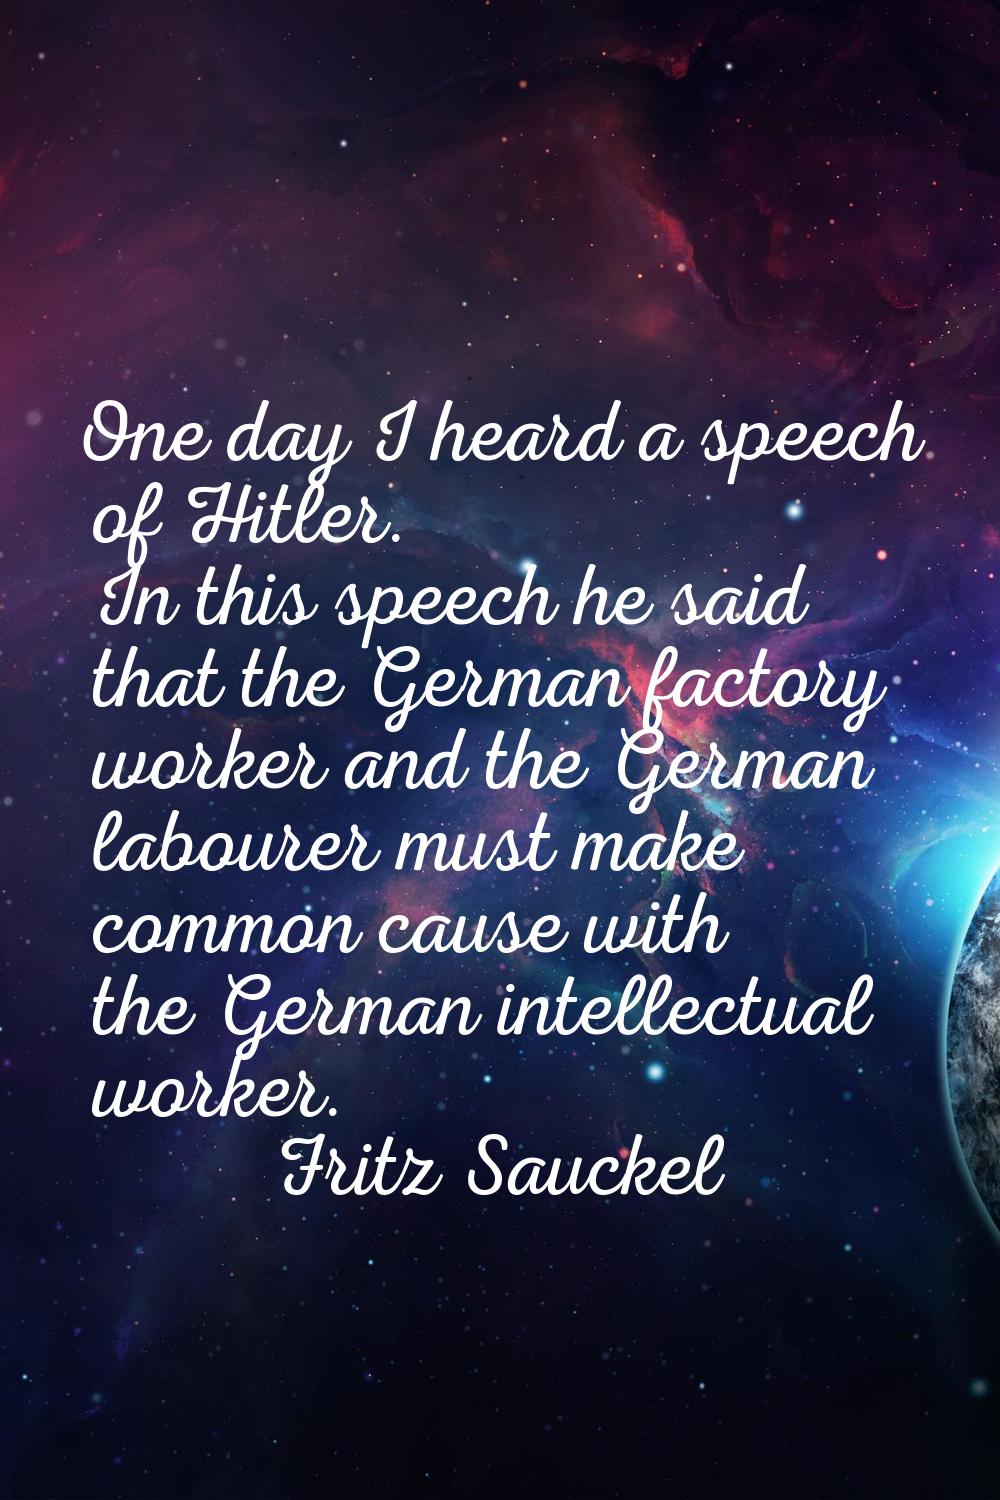 One day I heard a speech of Hitler. In this speech he said that the German factory worker and the G